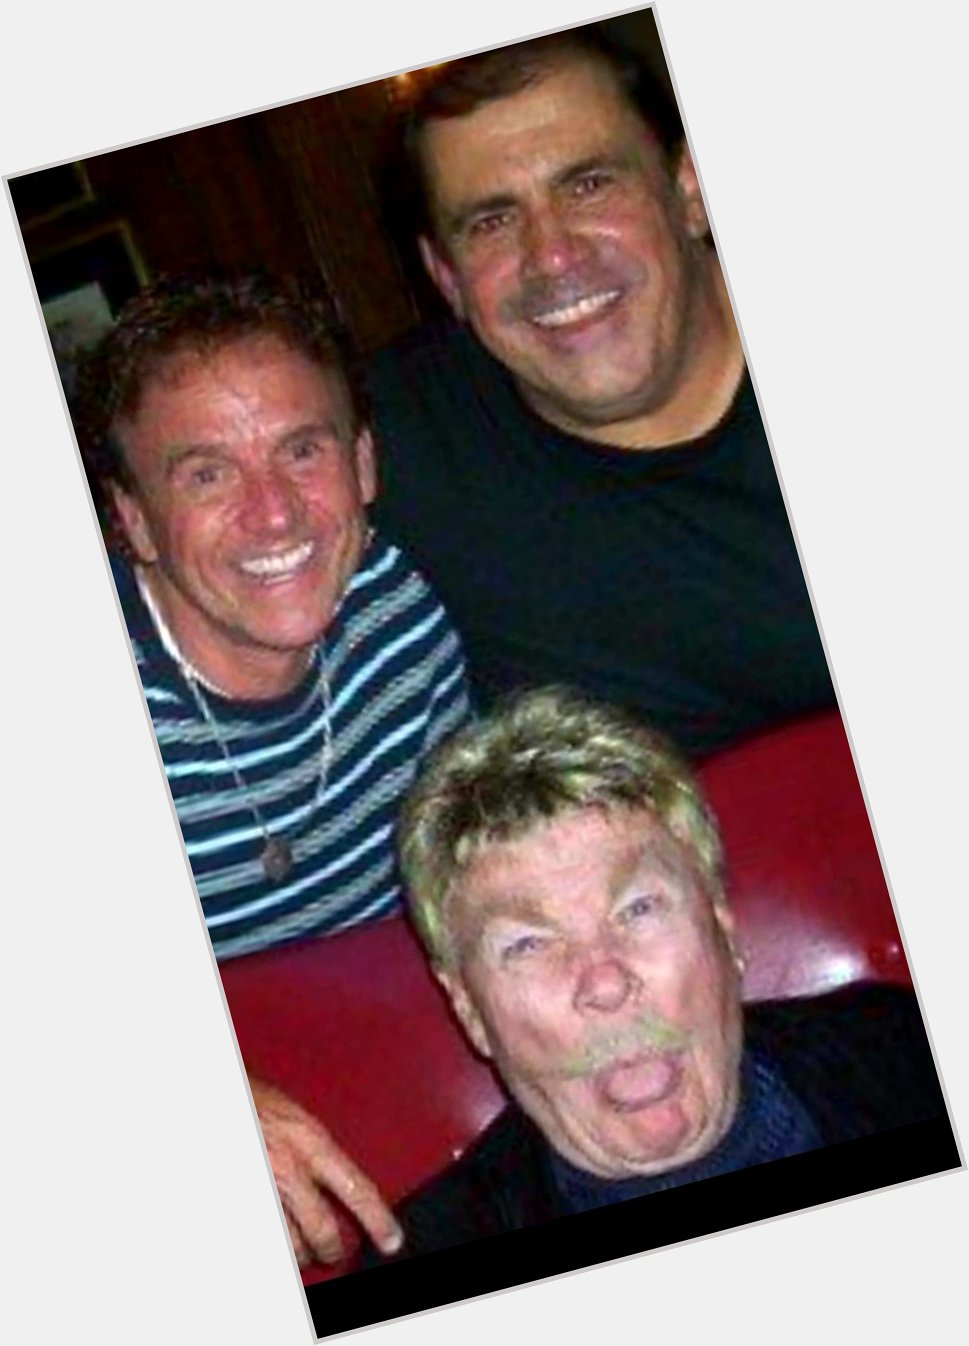 Happy Birthday to Rip Taylor. I\ll never forget the fun times with him and John. 